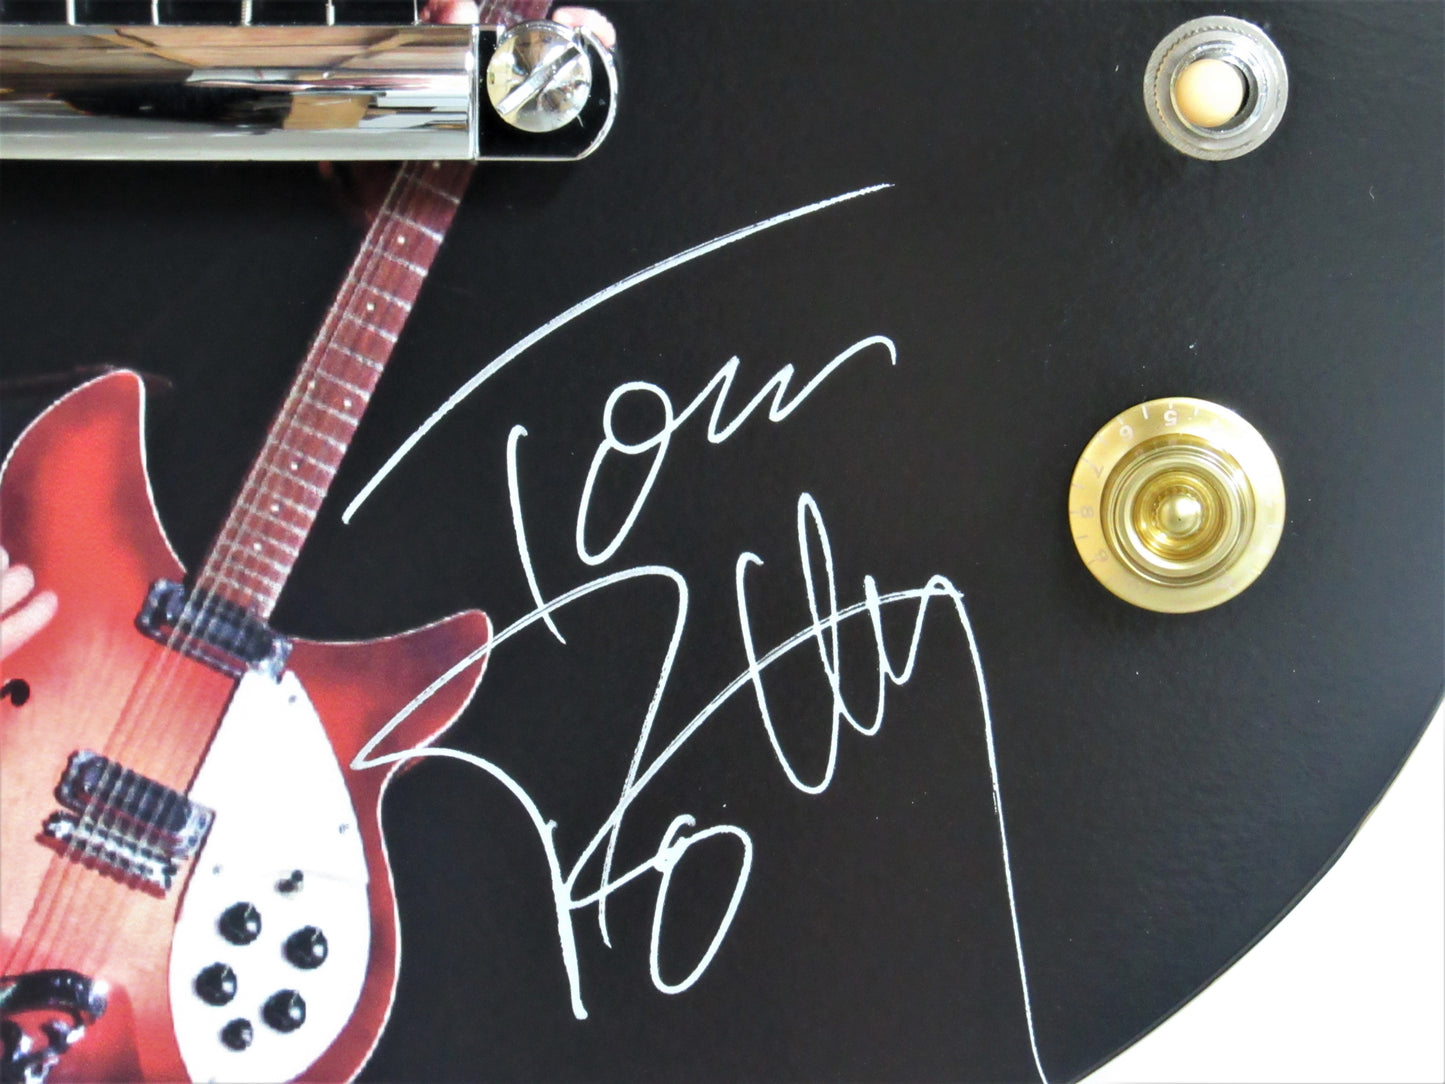 Tom Petty Autographed Guitar - Zion Graphic Collectibles